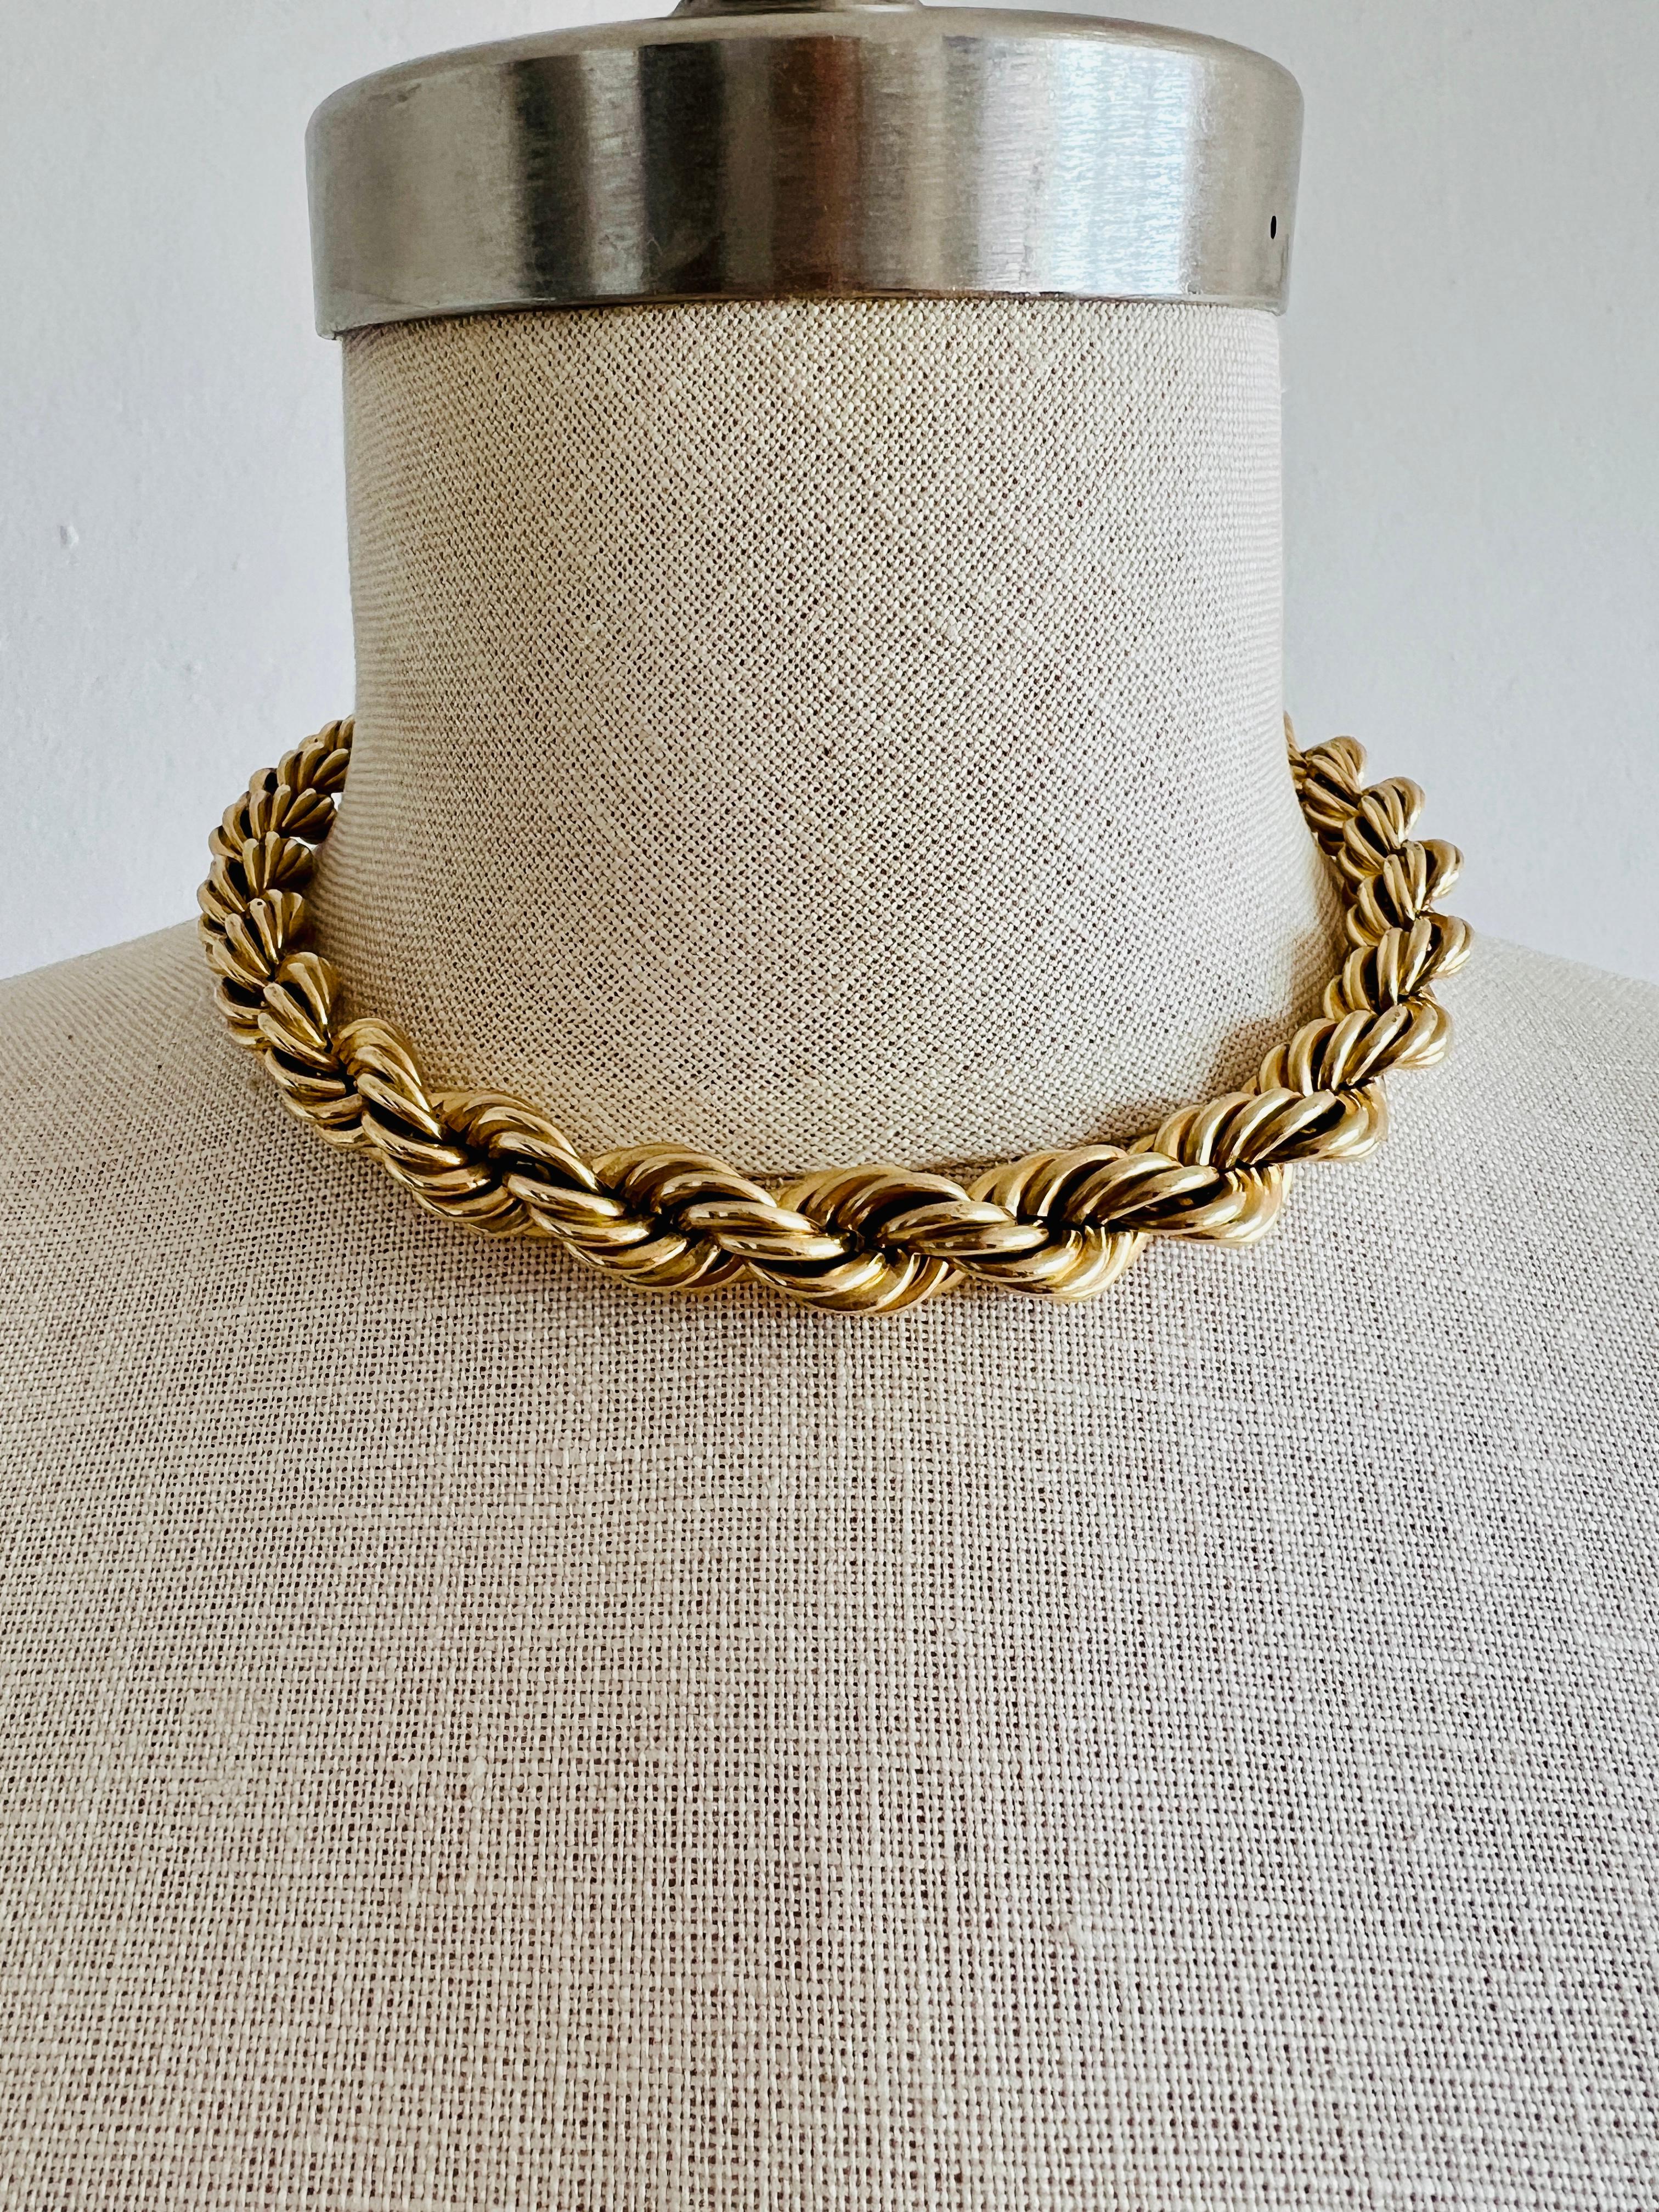 Versatile thick rope chain necklace that can be worn as a choker necklace or doubled into a bracelet, both creating a statement!

Length: The rope chain is 15-1/2 in long by 11 mm wide. 
Weight: 39.8 grams. The heft is light weight for its